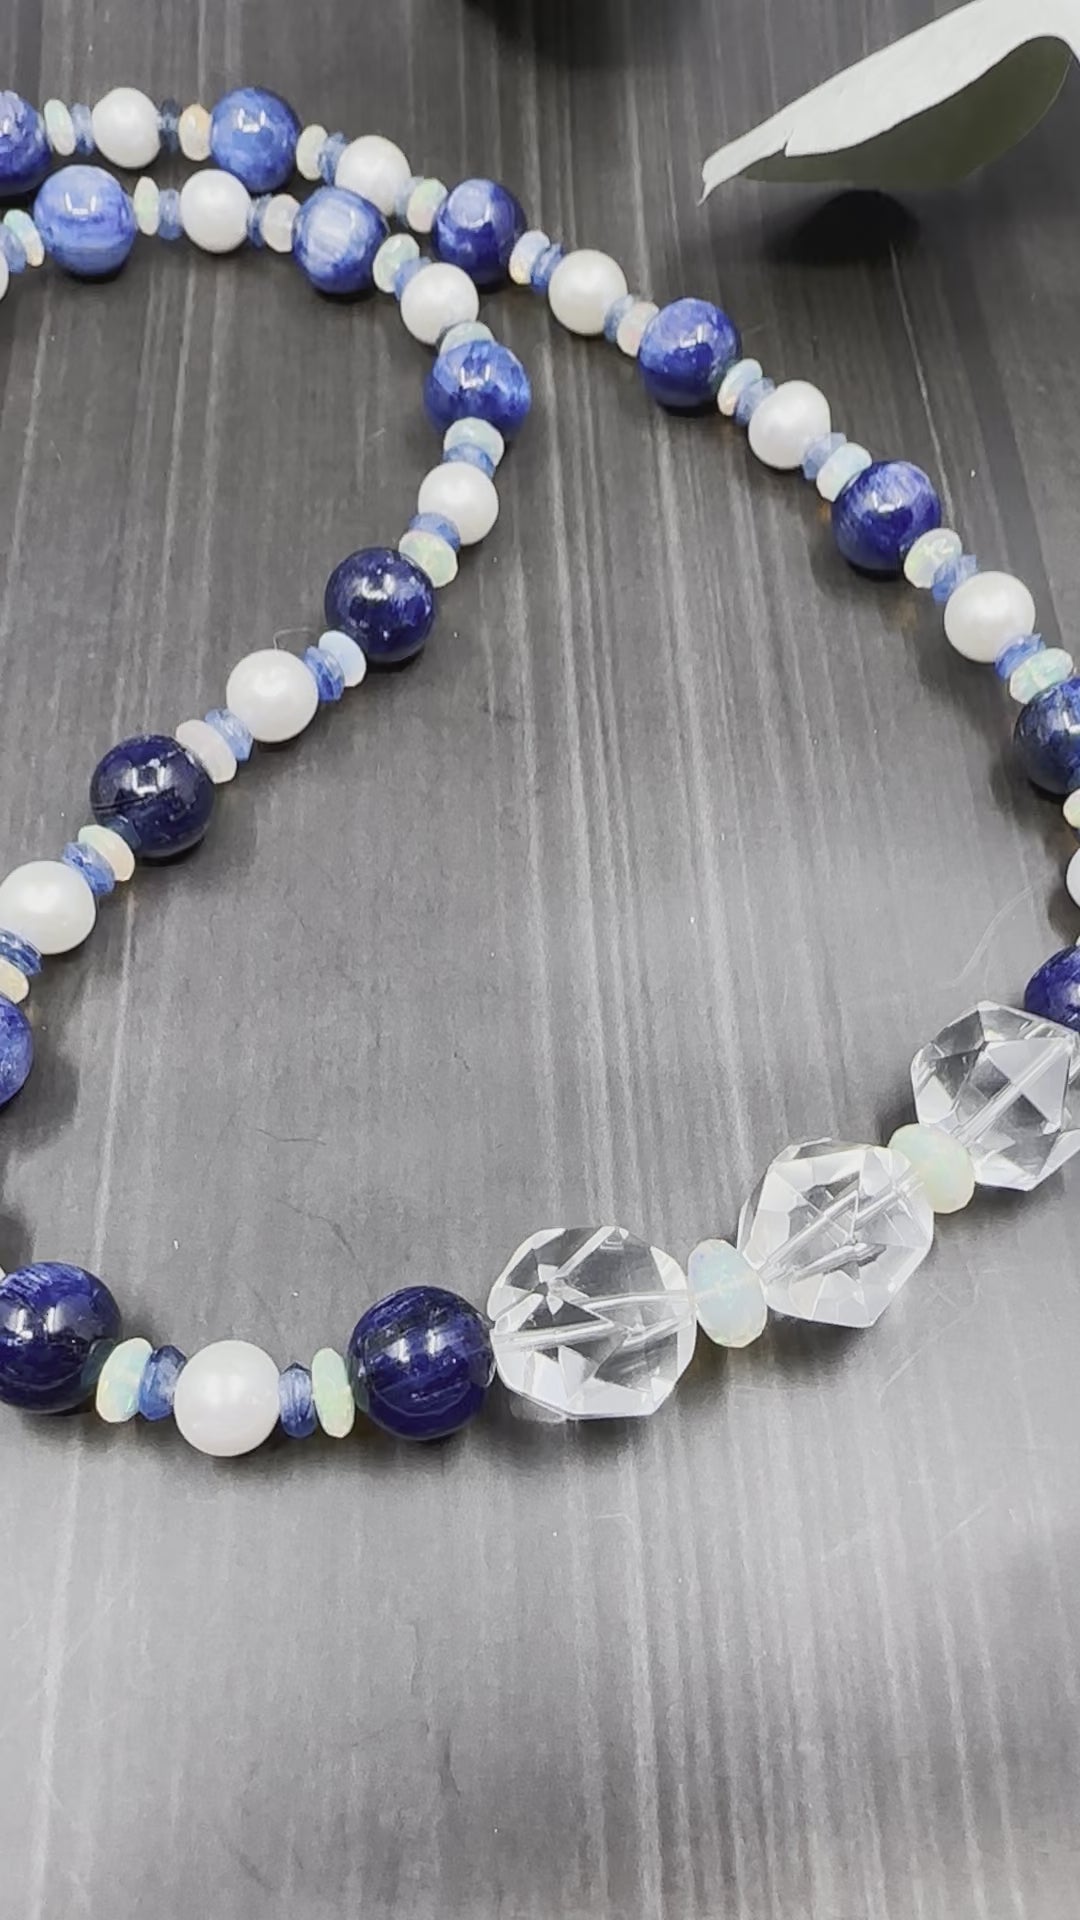 Luxurious AAA Kyanite, Ethiopian Faceted Opals, and Pearls necklace